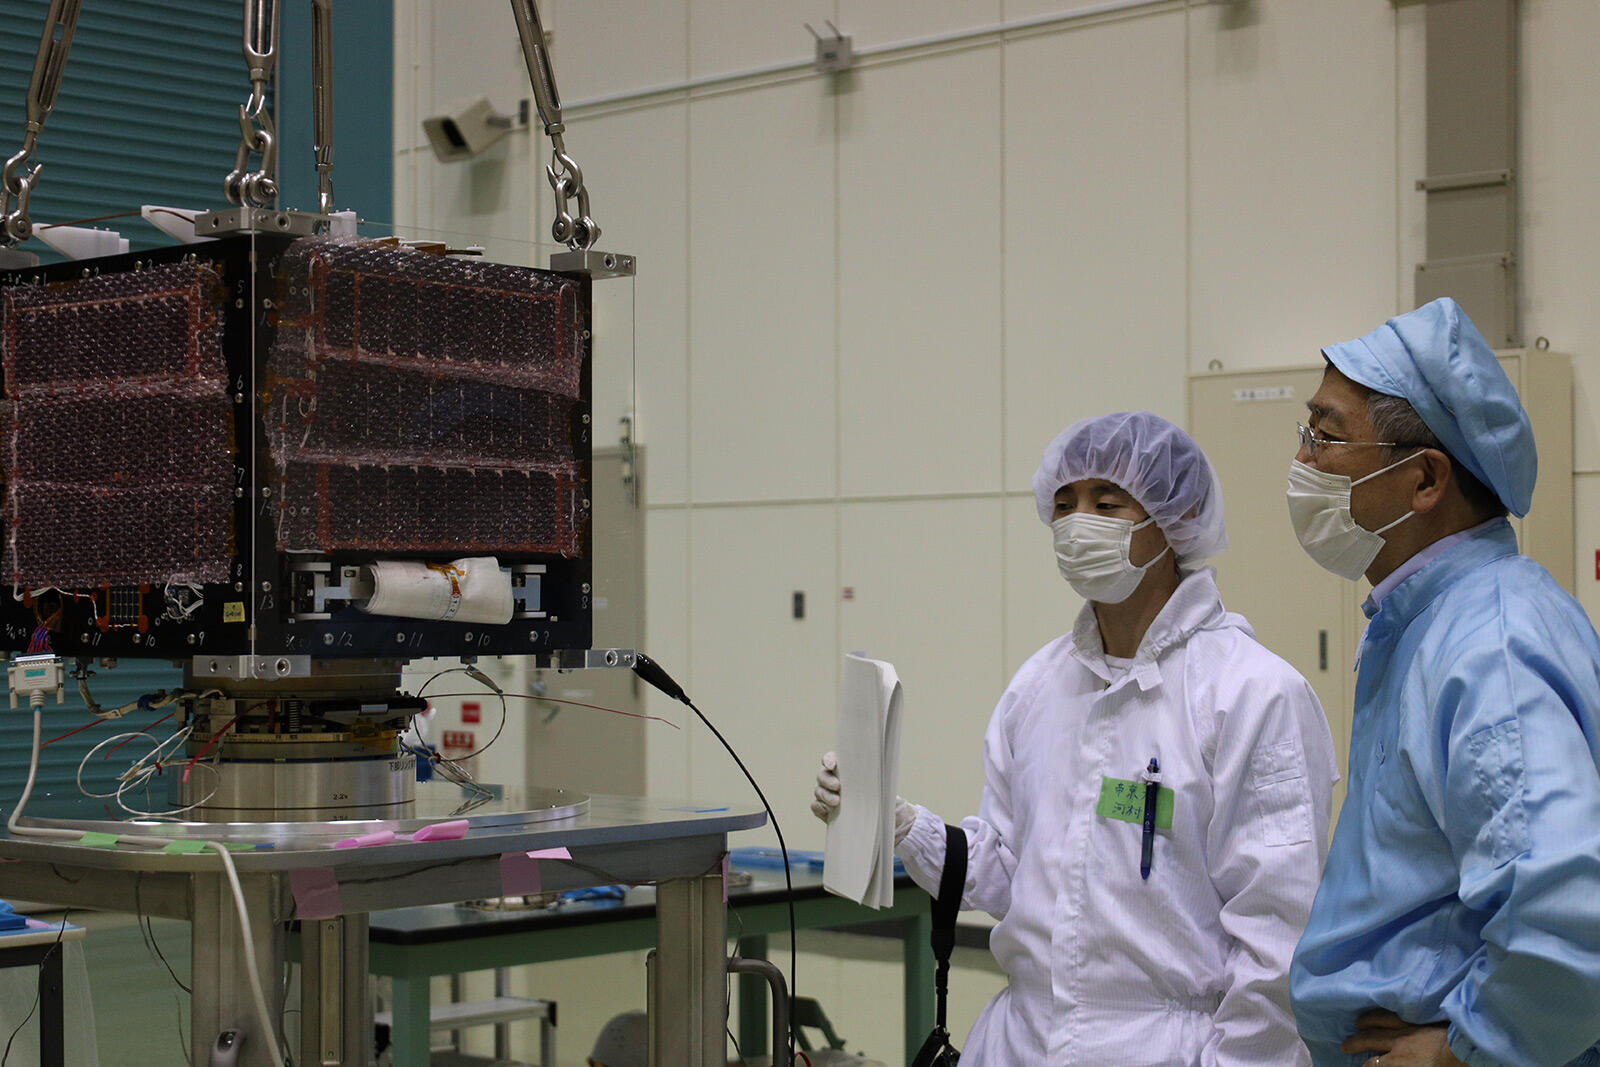 Group Head Kaneko attending the test on TeikyoSat-4, which is one of the microsatellites to be launched in Innovative Satellite Technology Demonstration-2 (right person in the photo)